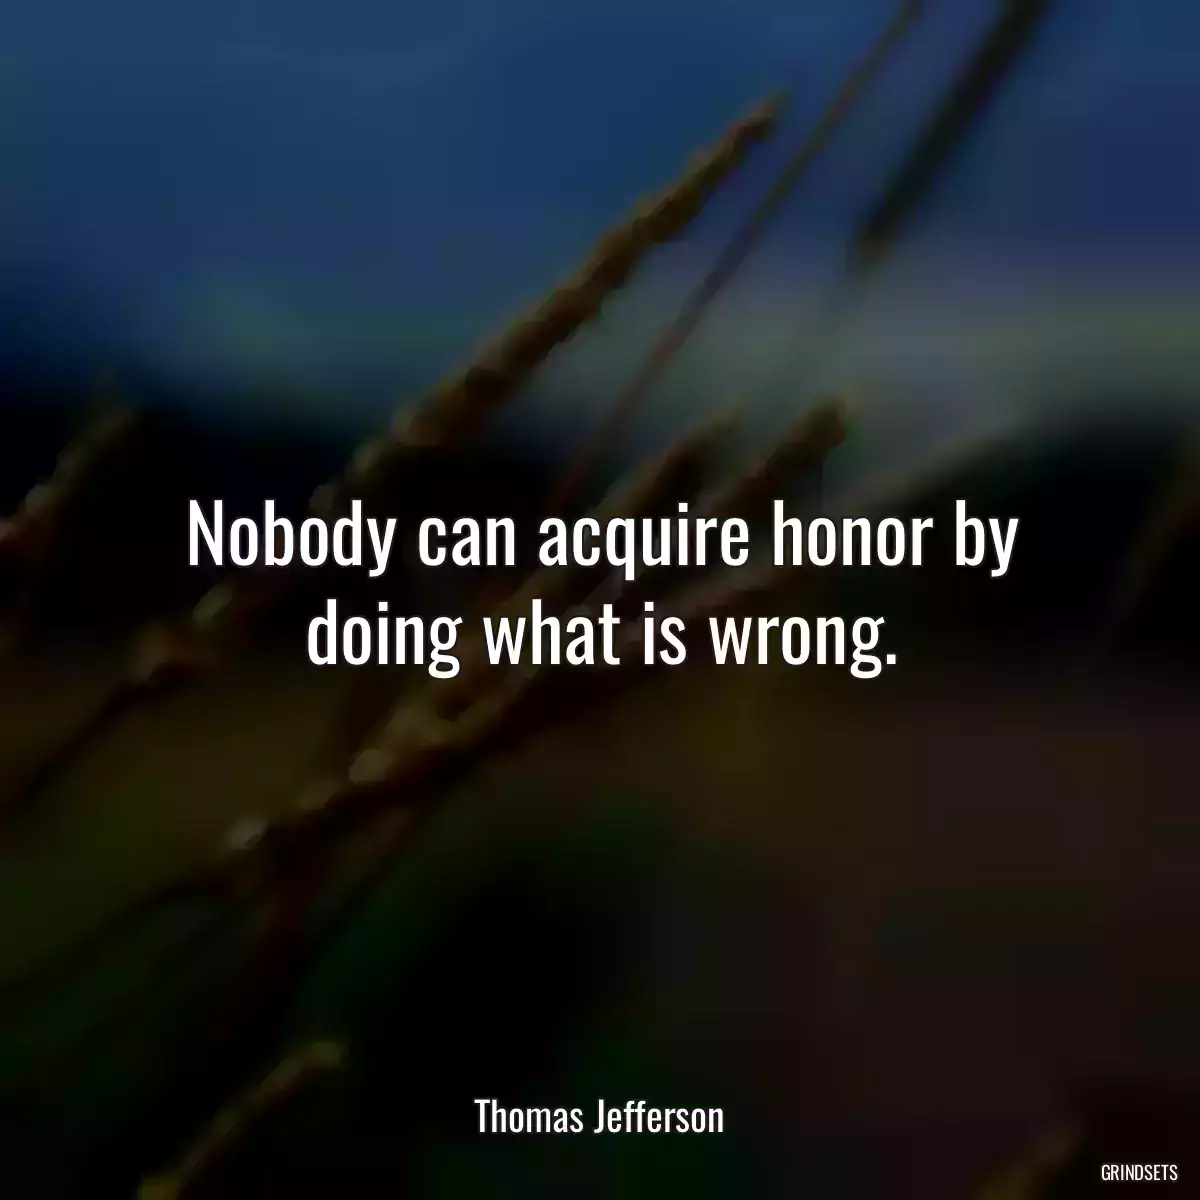 Nobody can acquire honor by doing what is wrong.